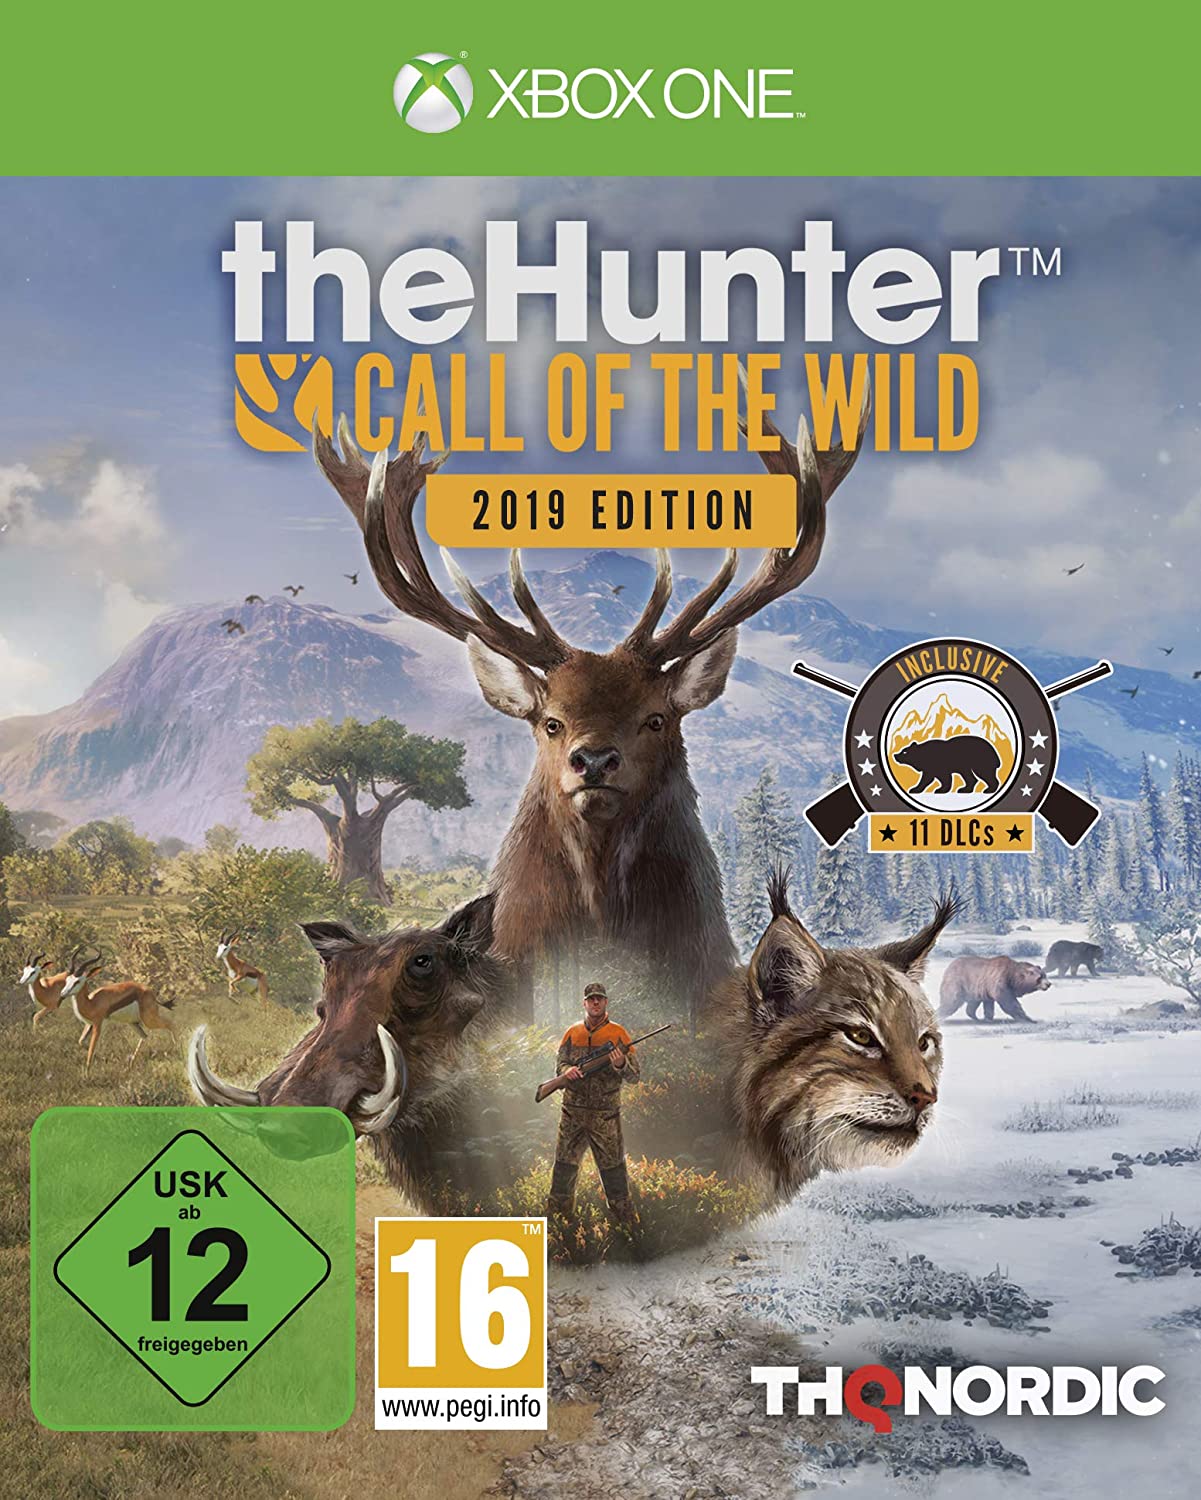 The Hunter Call of the Wild 2019 Edition